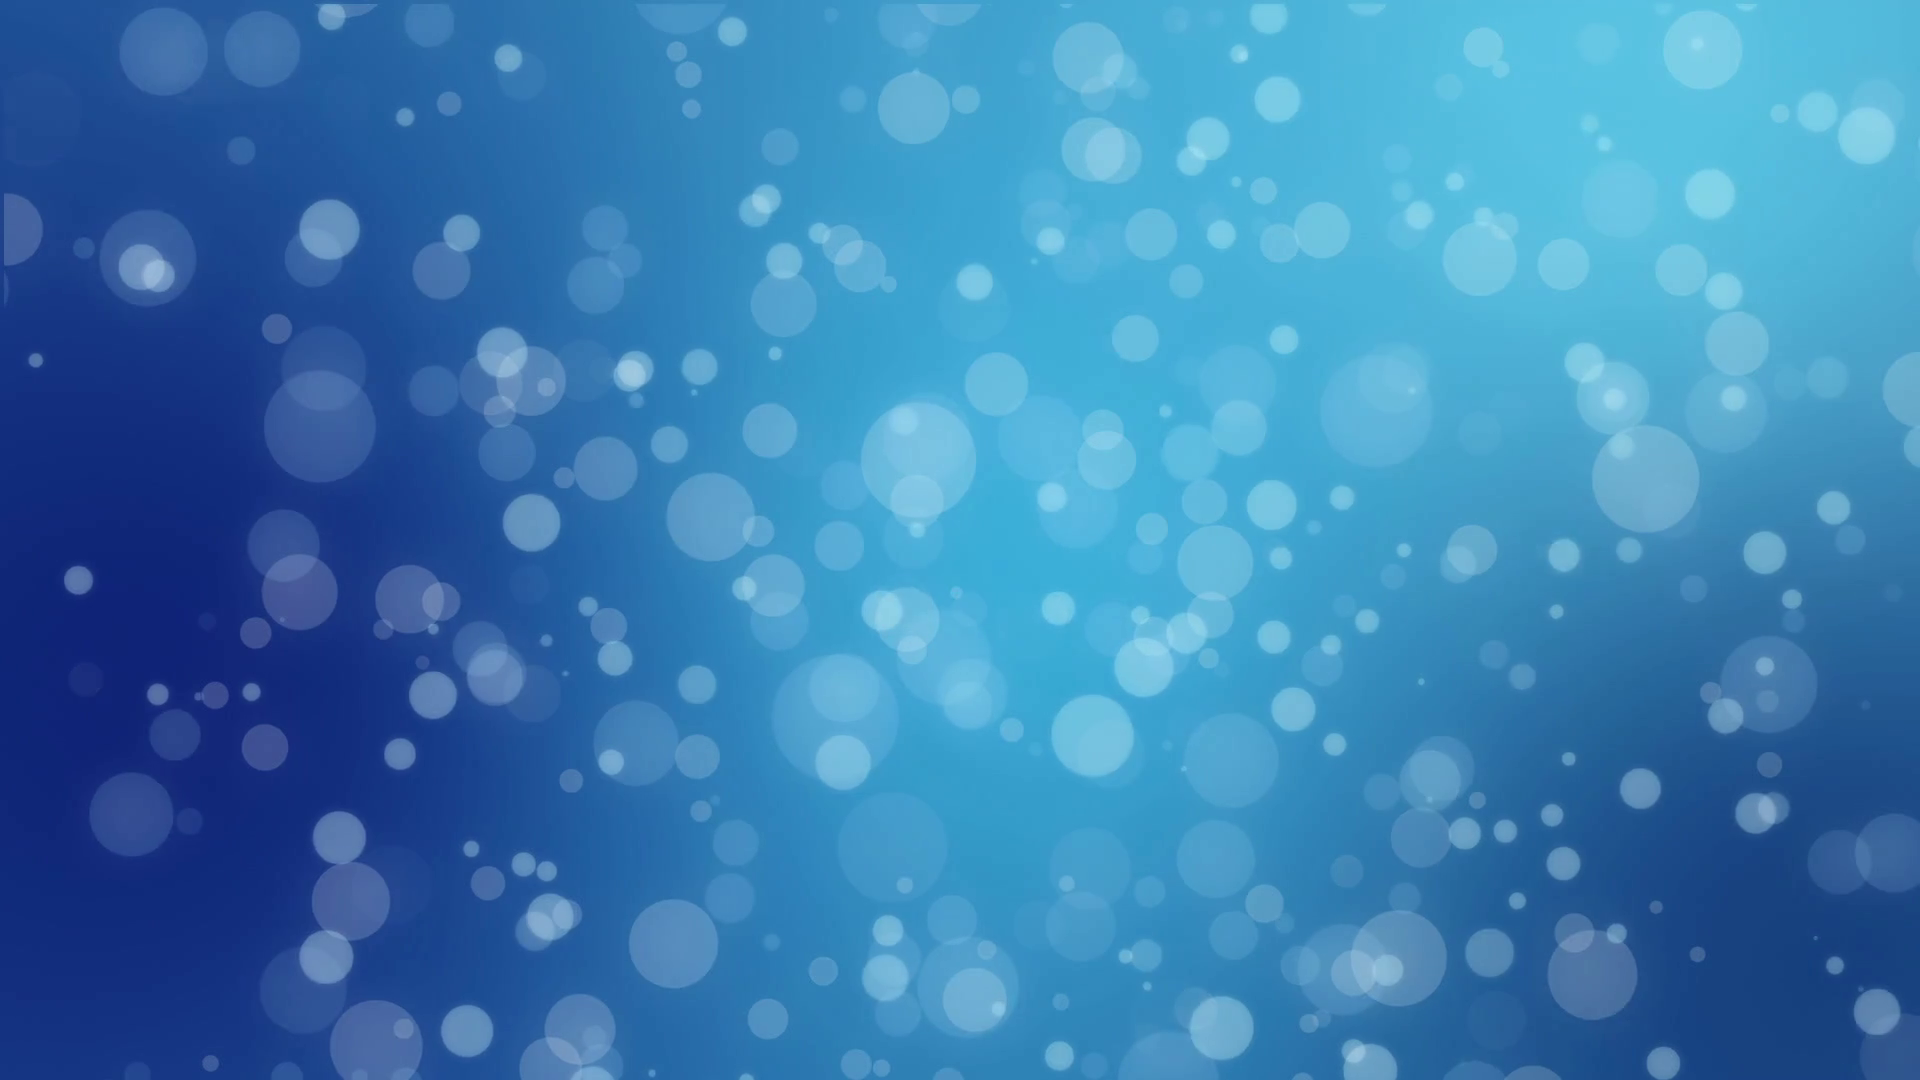 Bokeh holiday background with flickering circles against a gradient ...